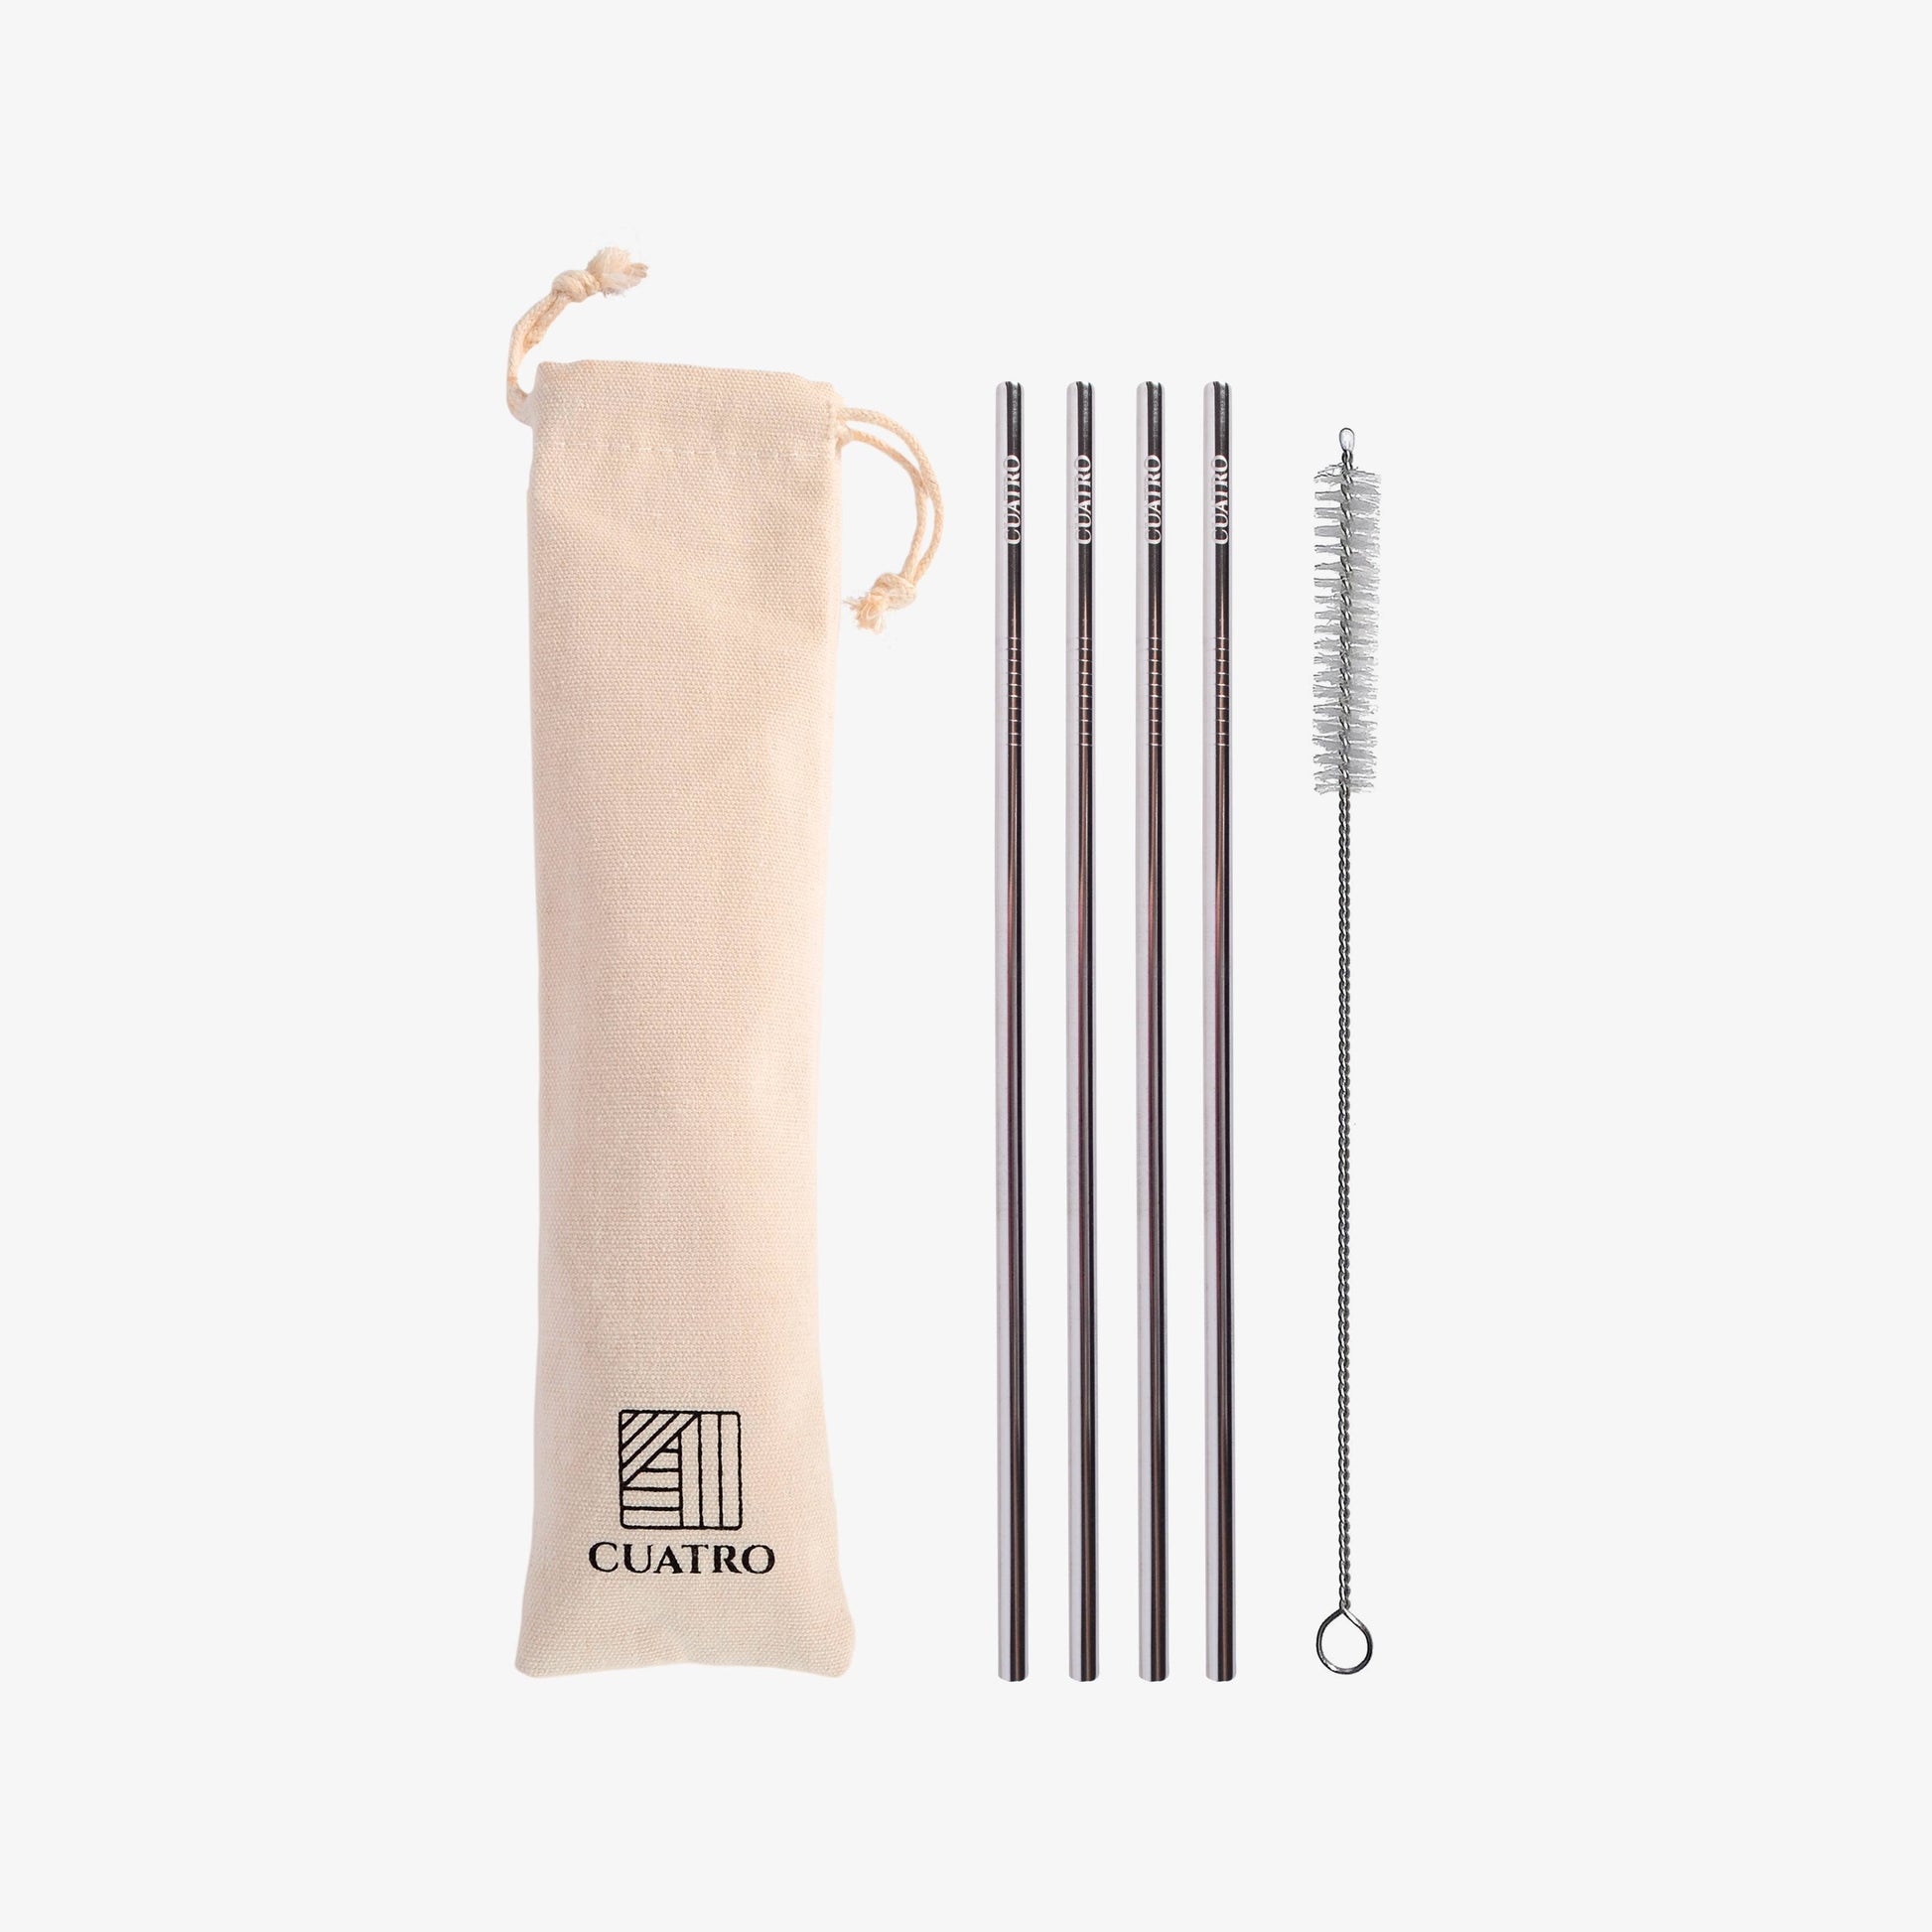 silver stainless steel straws pictured next to a drawstring bag and a straw cleaner